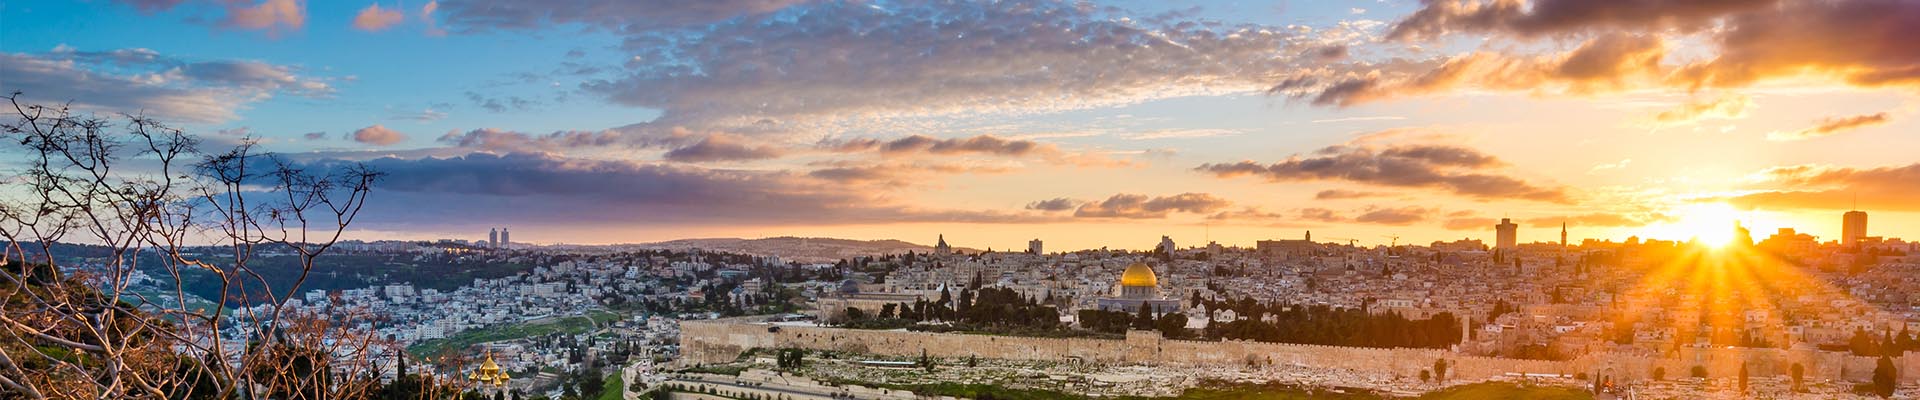 Israel Private Messianic Tours